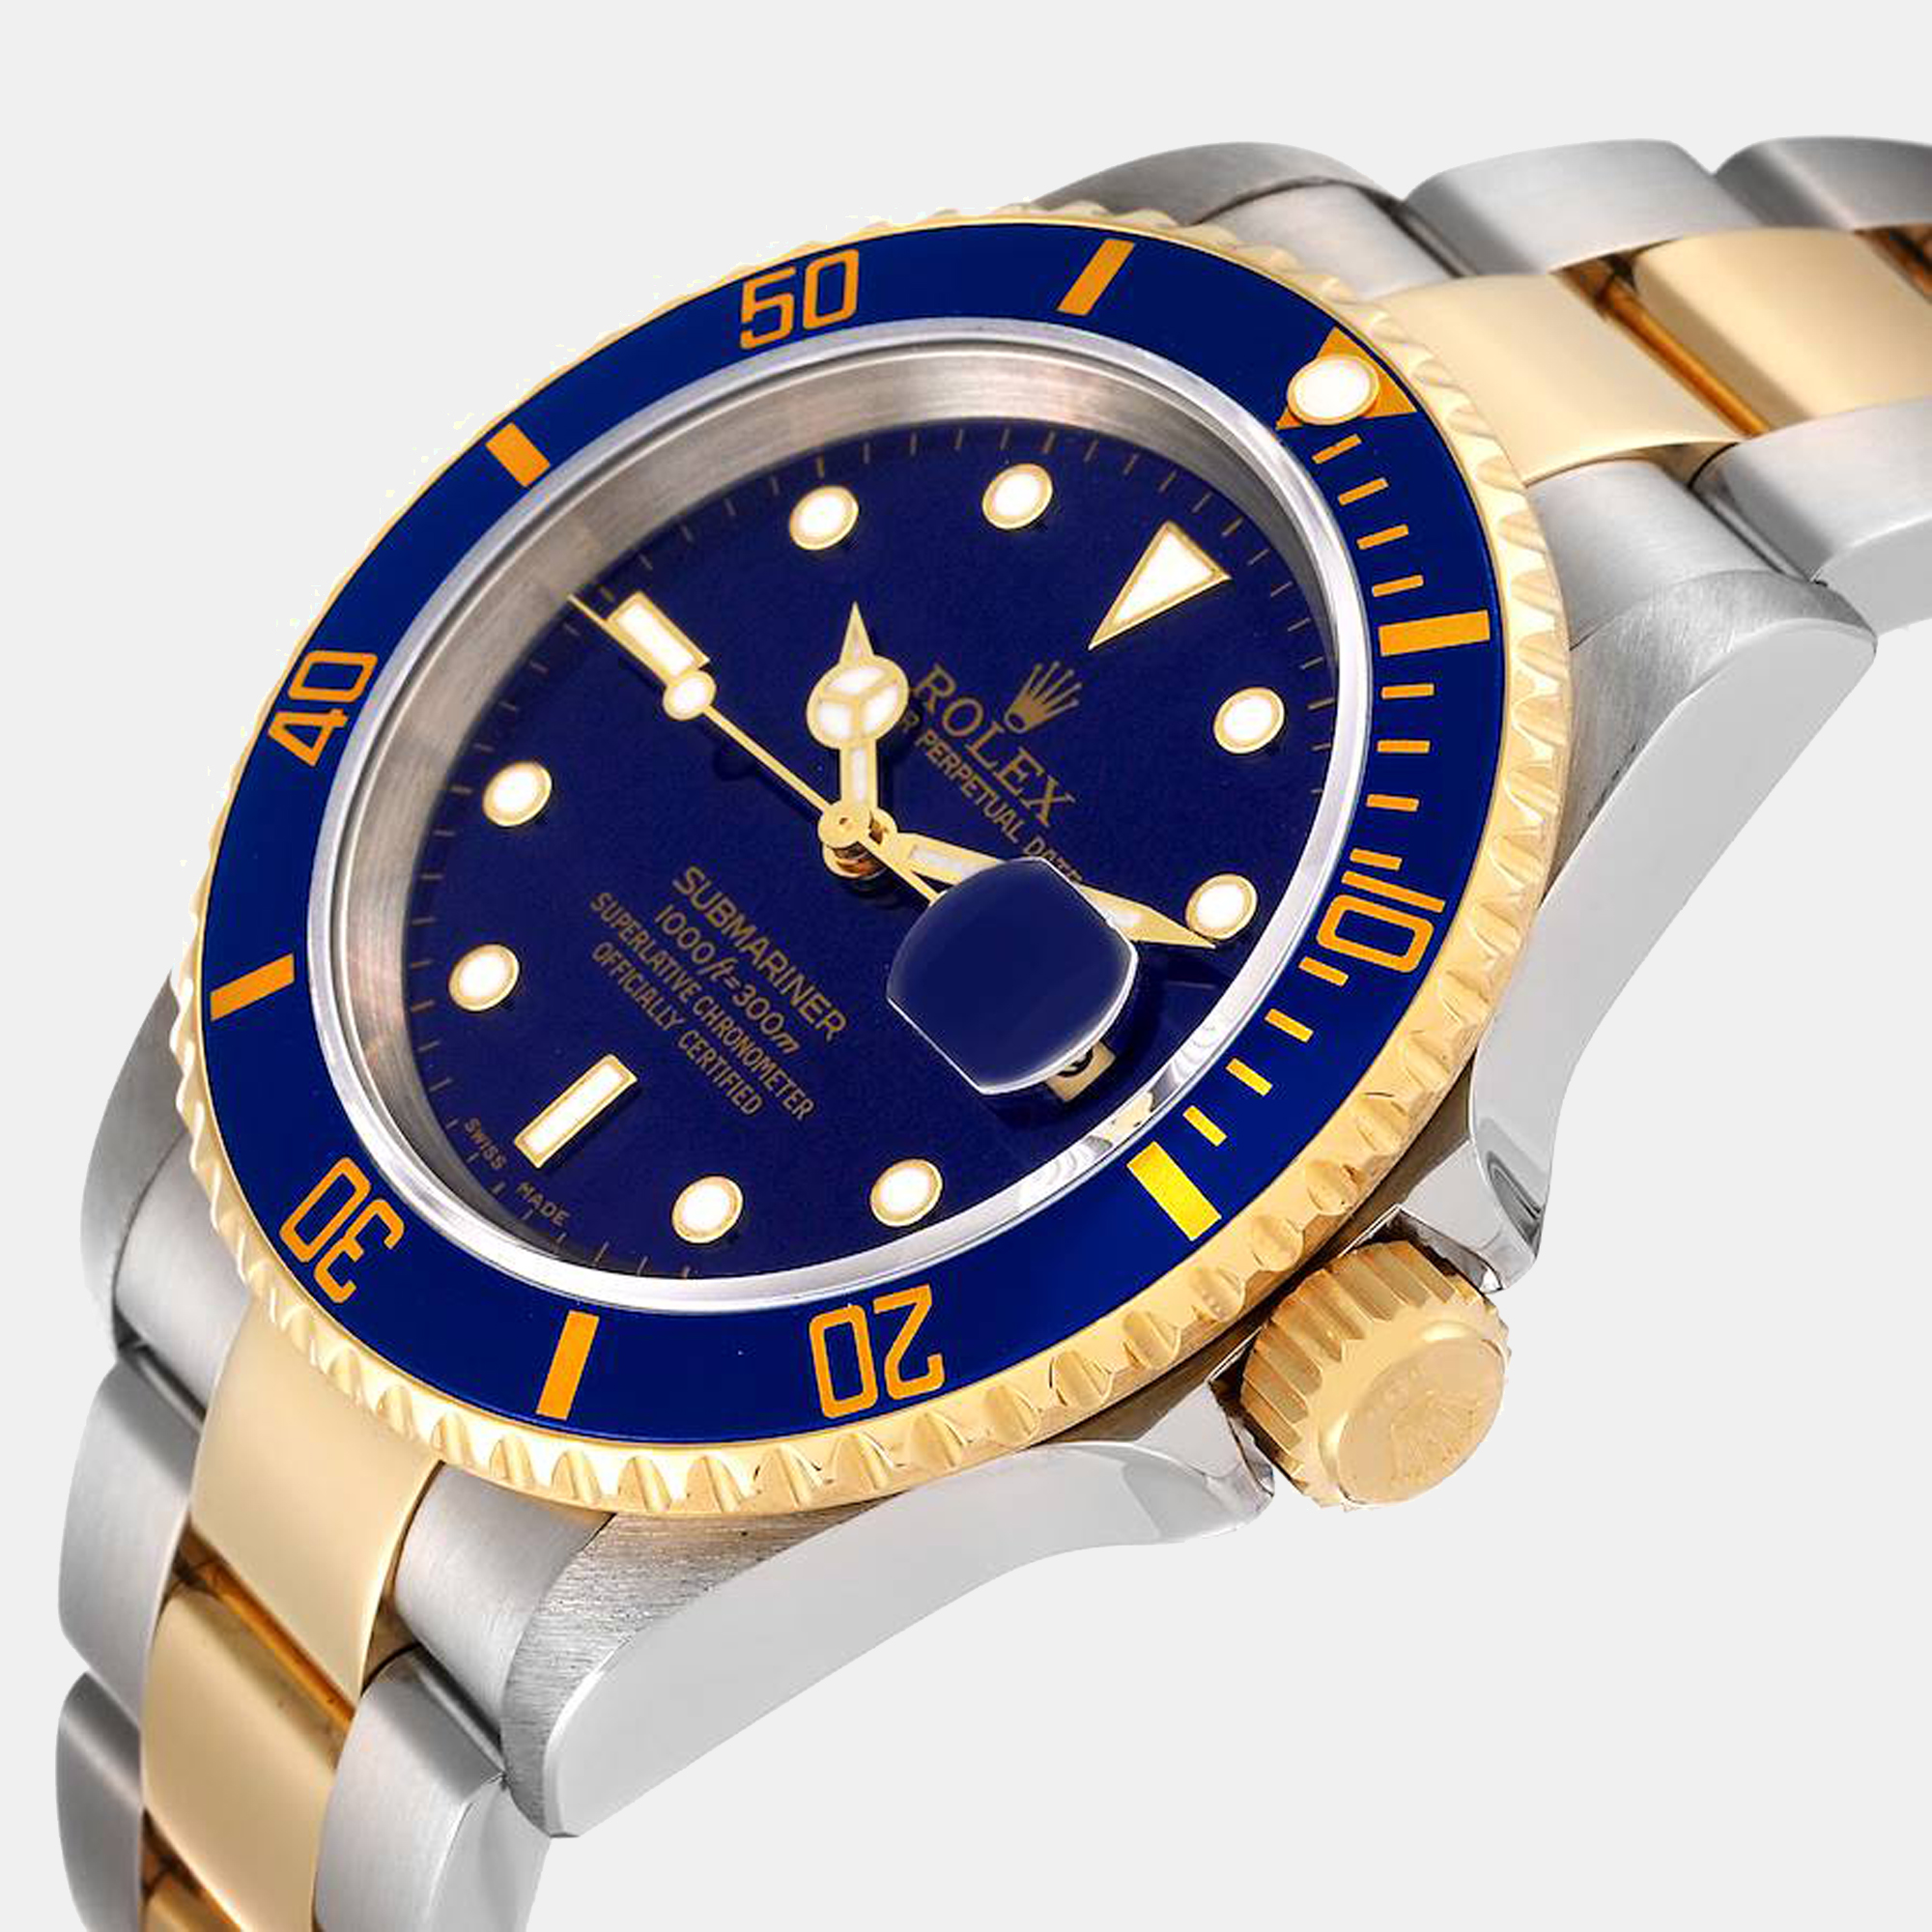 

Rolex Blue 18k Yellow Gold And Stainless Steel Submariner 16613 Automatic Men's Wristwatch 40 mm